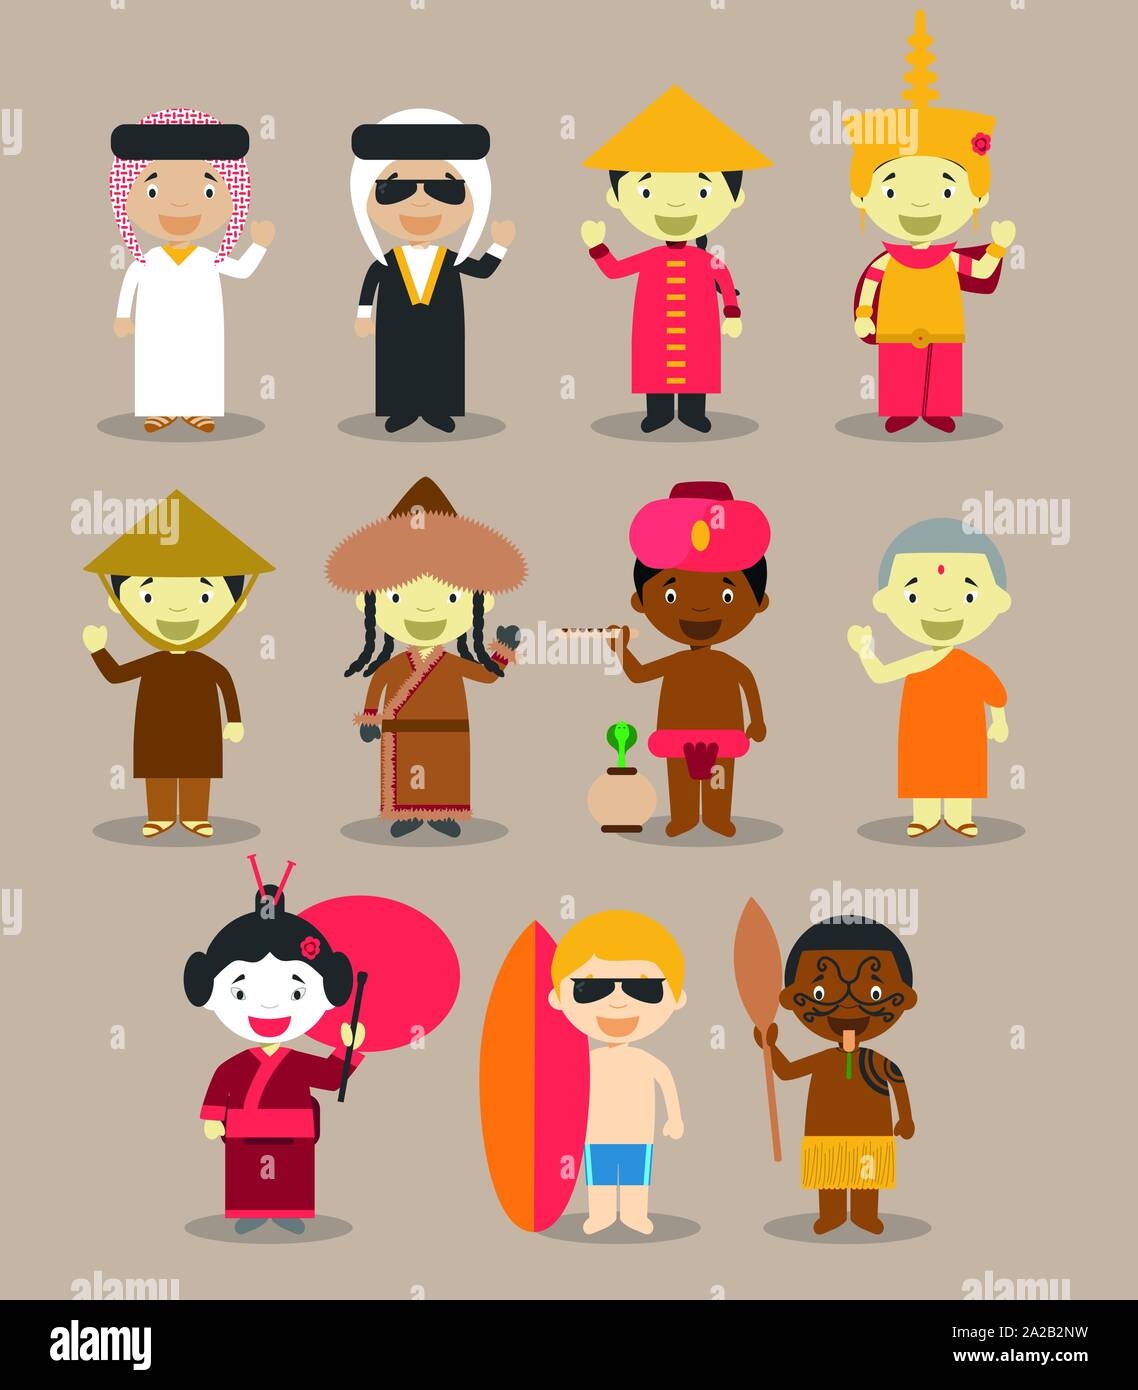 Kids and nationalities of the world vector: Asia and Oceania/Australia Set 3. Set of 11 characters dressed in different national costumes Stock Vector